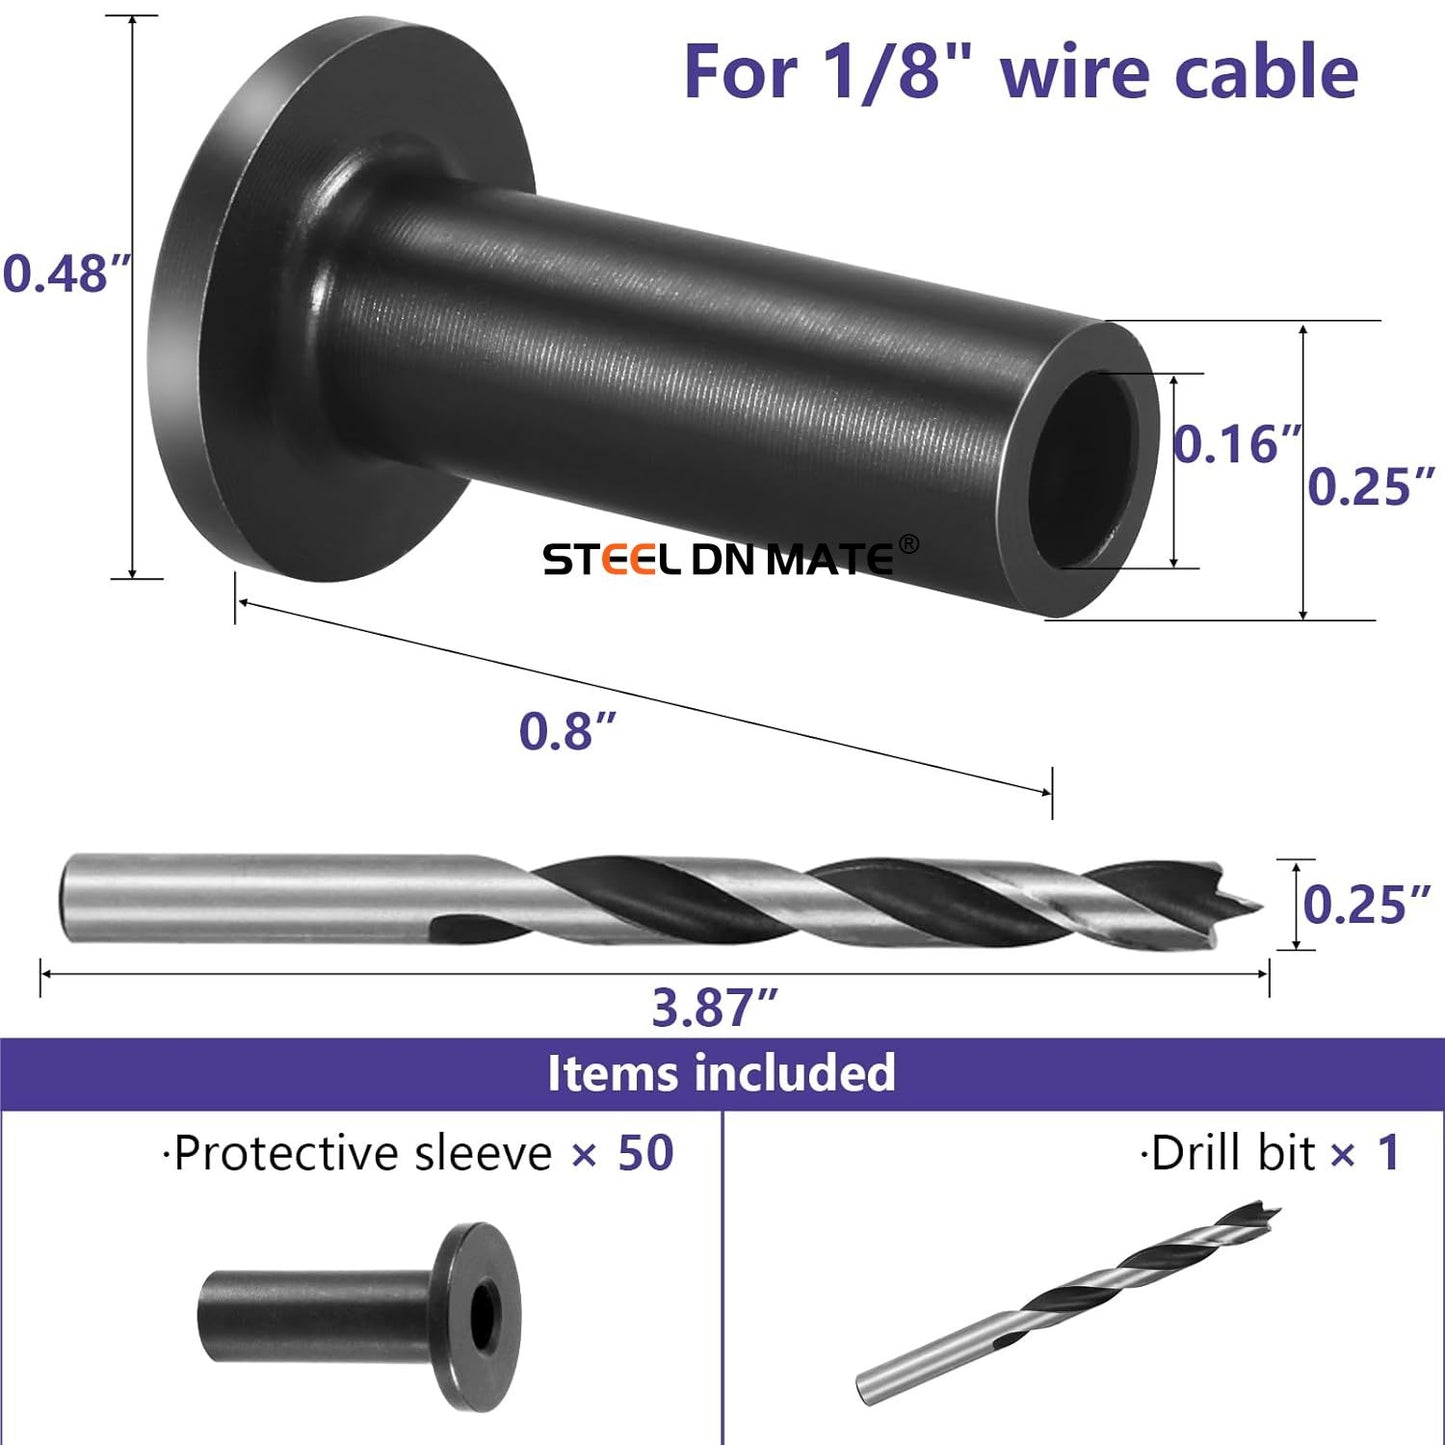 Steel DN Mate 50 Pack Black Cable Railing Protector Sleeves 1/8 for Wire Rope Cable, T316 Protective Sleeves for Wood Post, T316 Stainless Steel Marine Grade, DB58